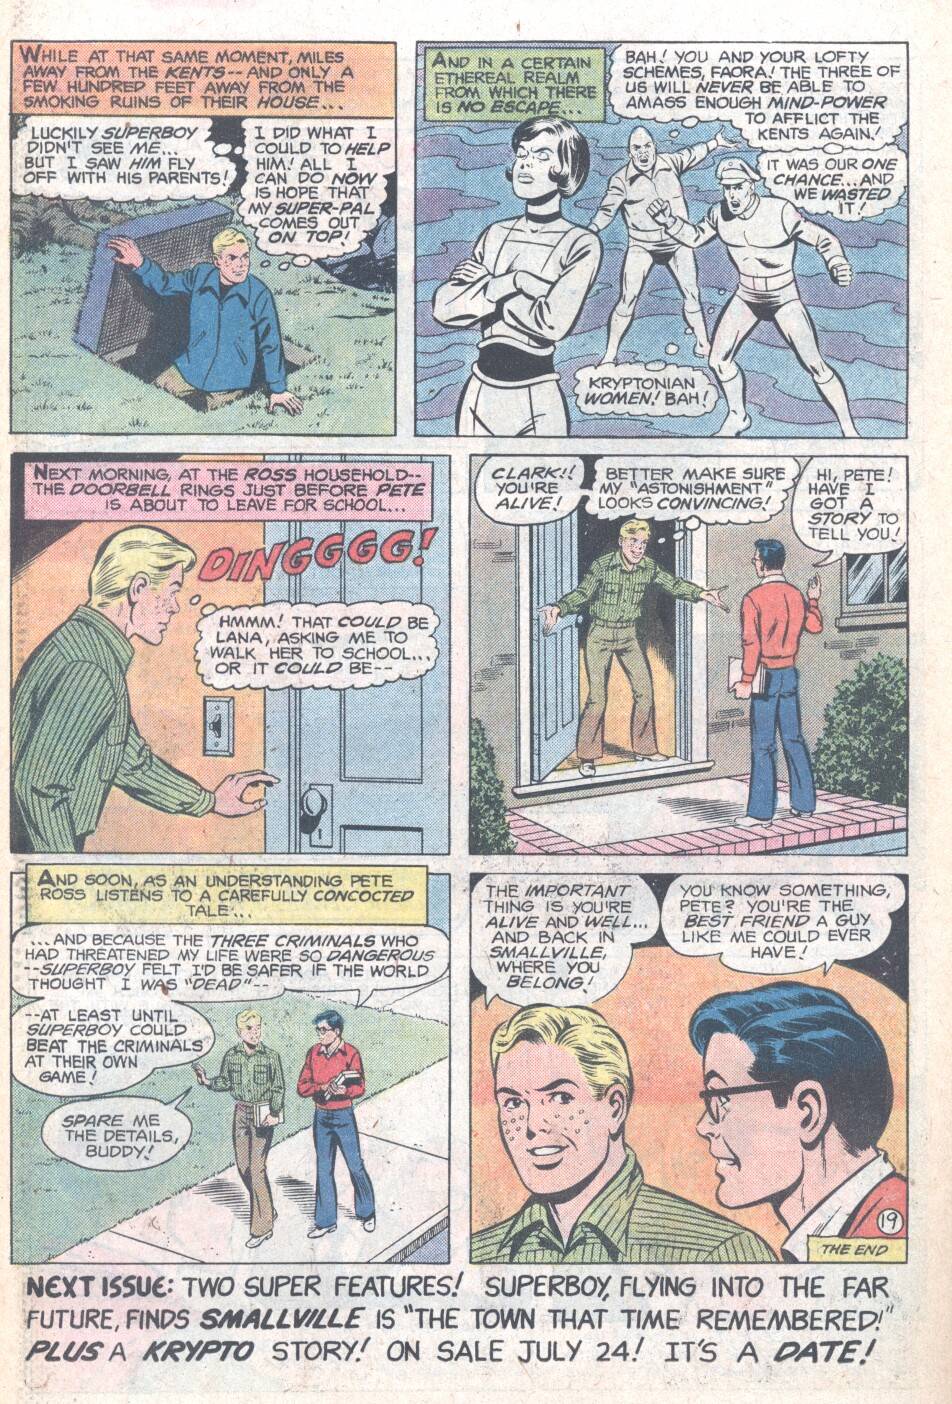 The New Adventures of Superboy 9 Page 19